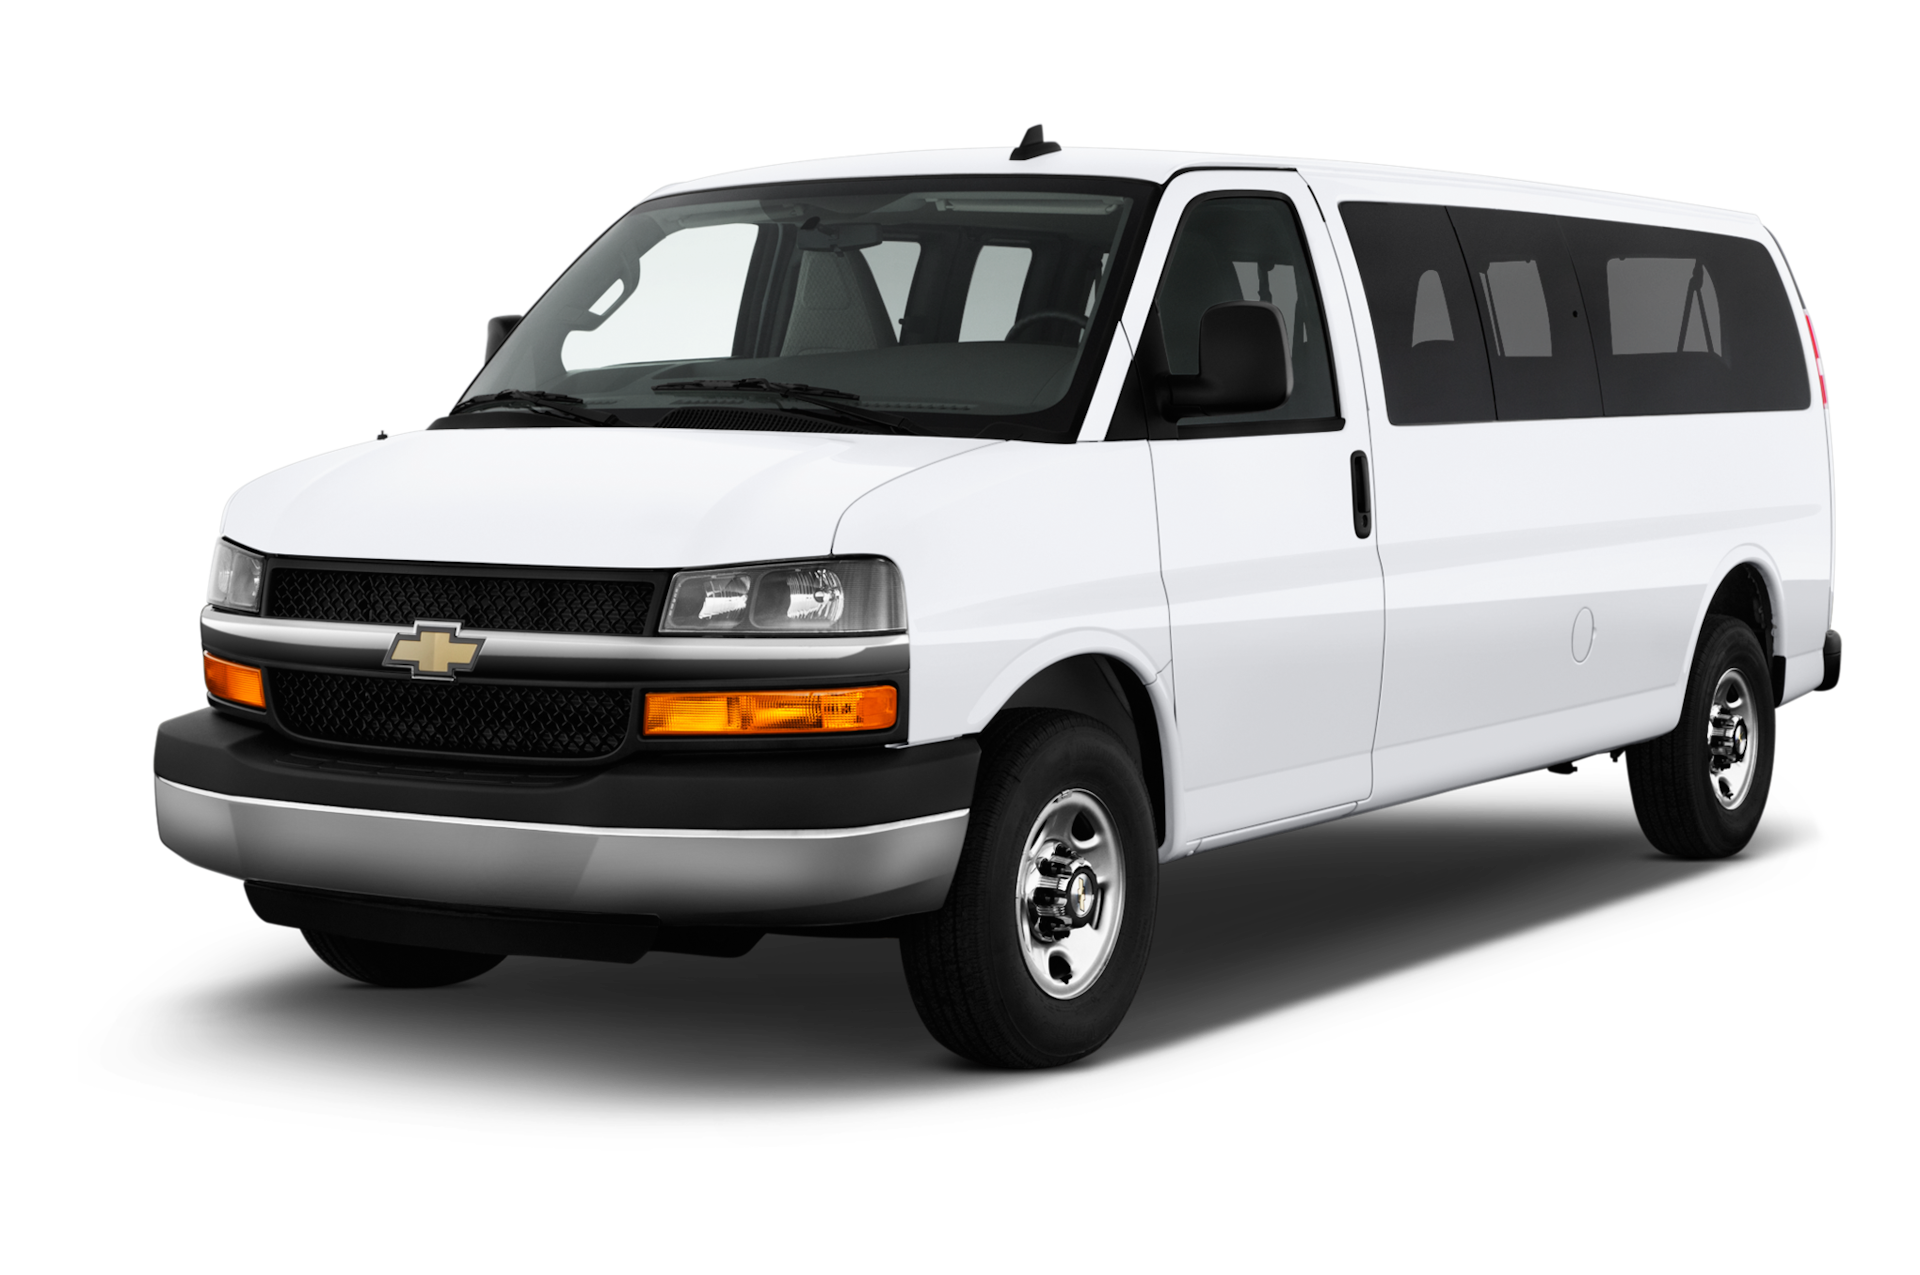 2017 Chevrolet Express Prices, Reviews, and Photos - MotorTrend